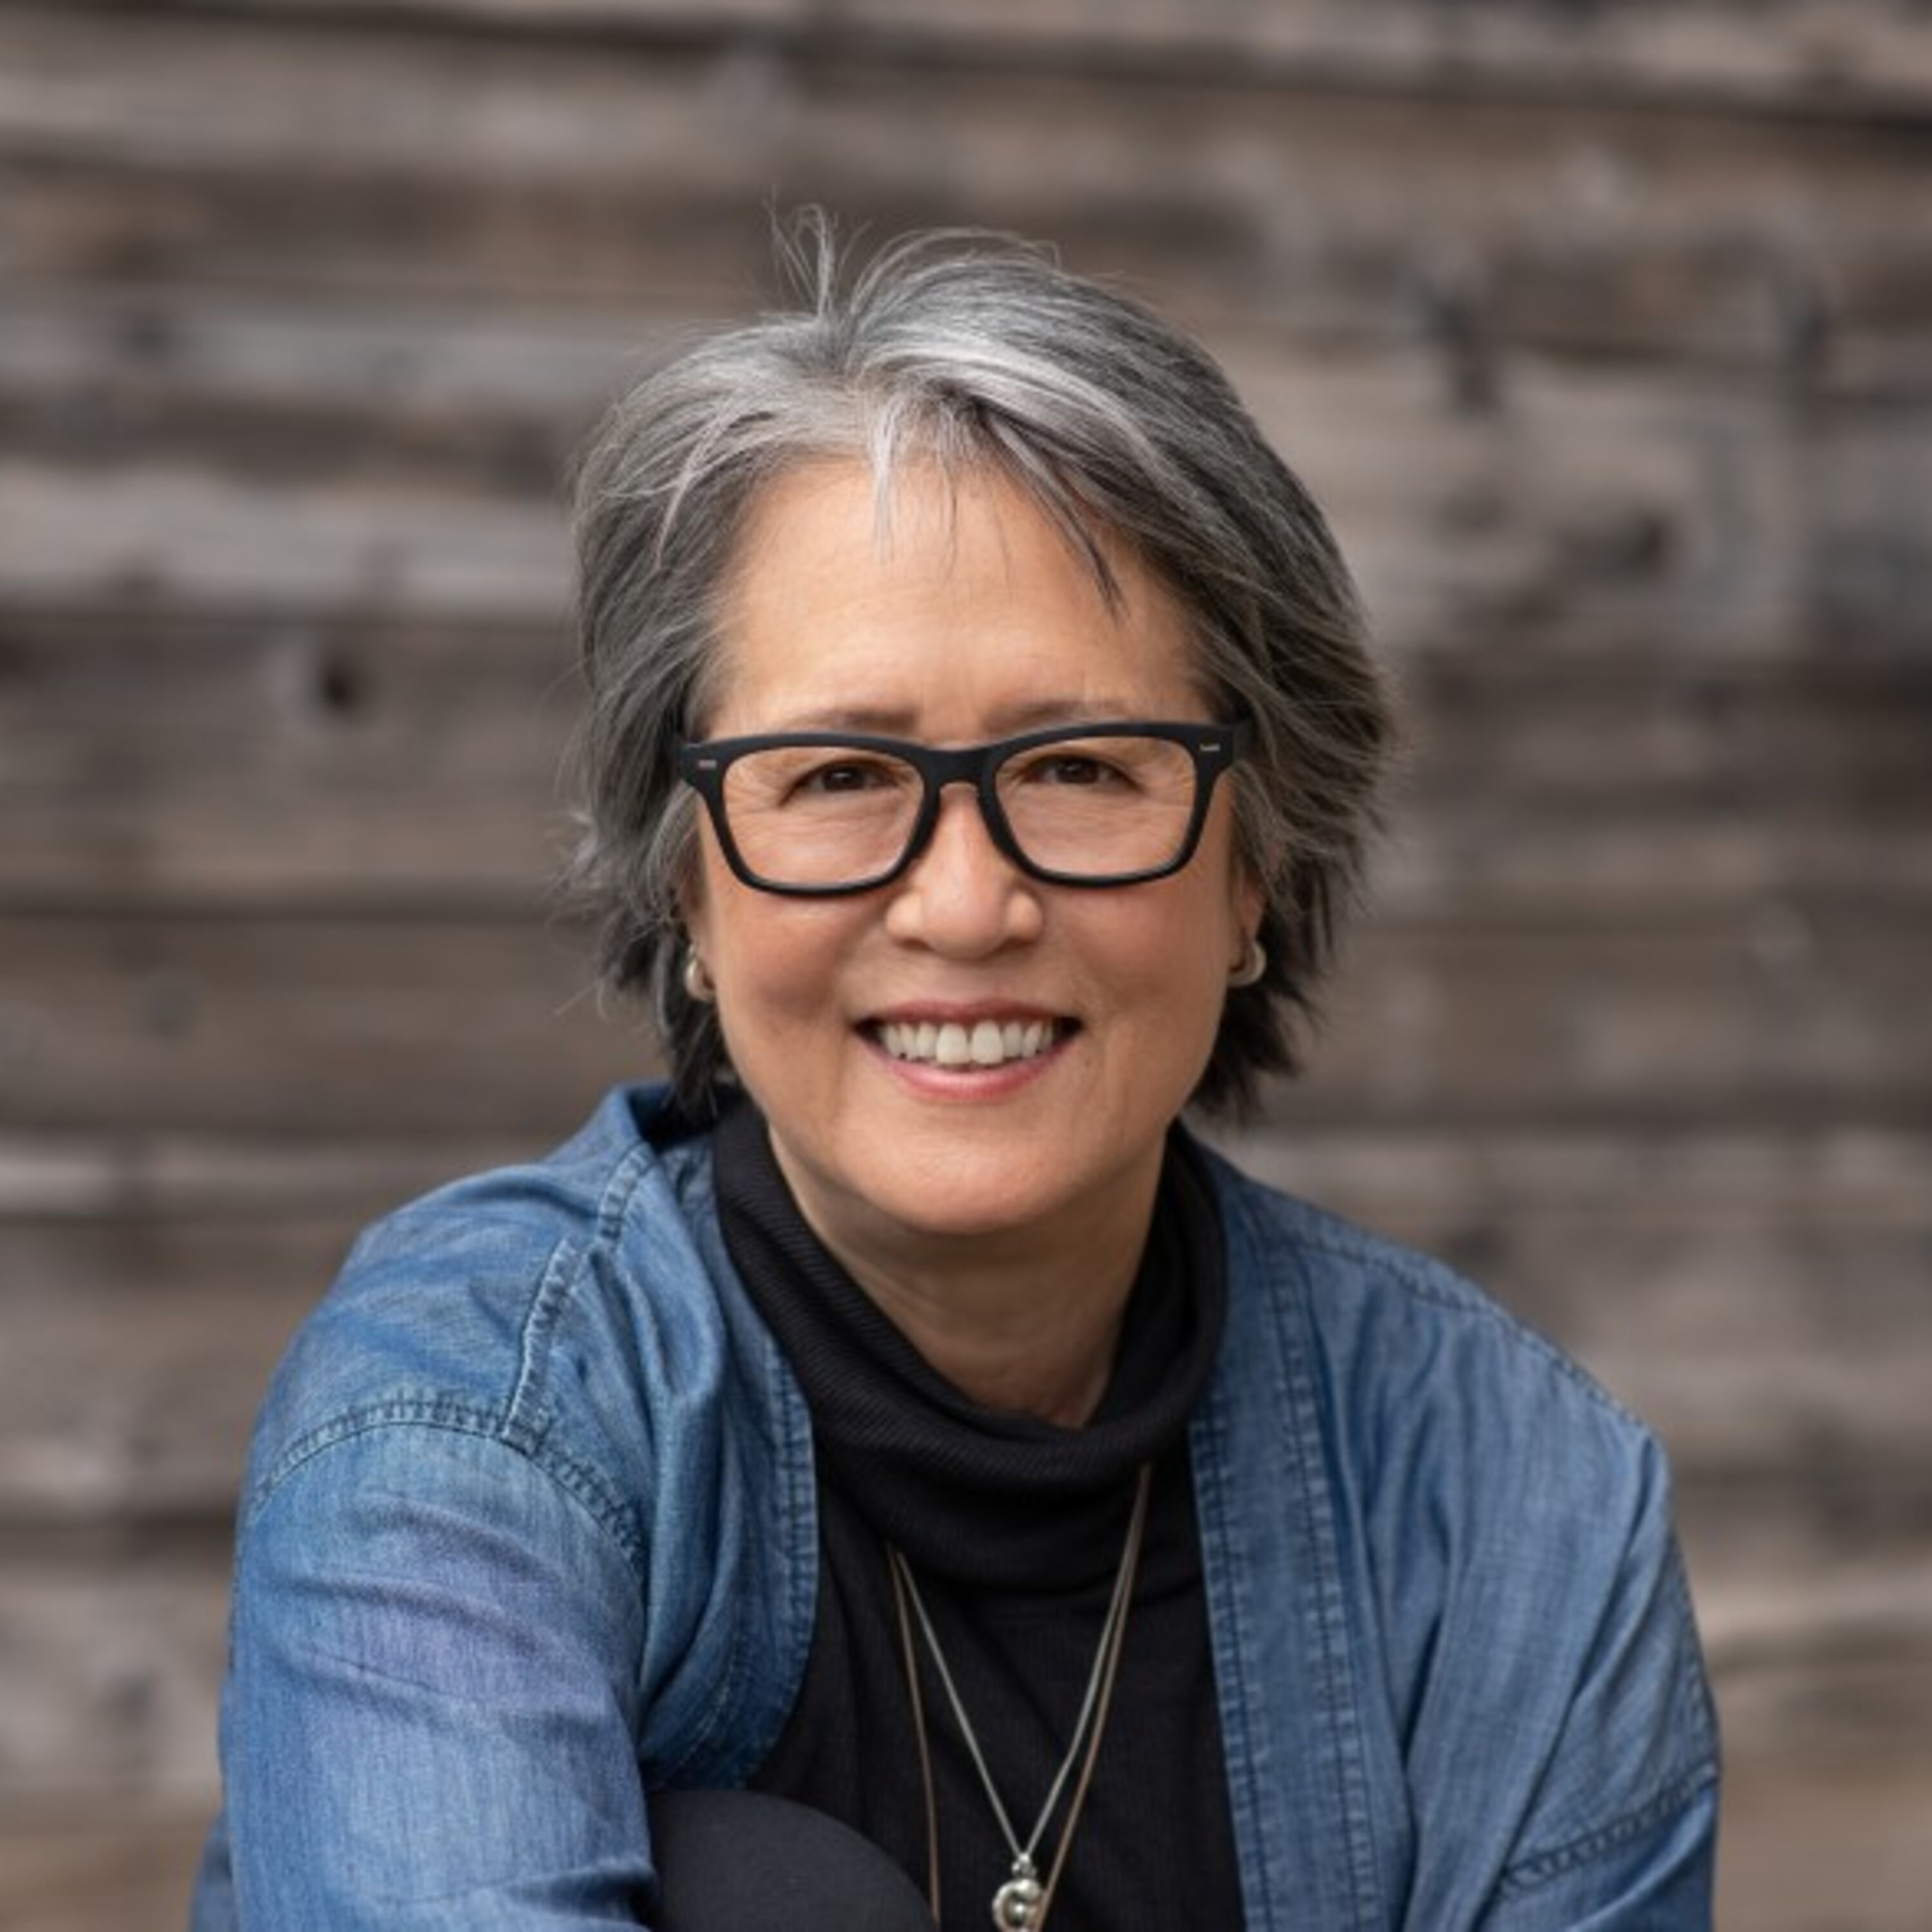 Ruth Ozeki on Her New Novel 'The Book of Form and Emptiness'